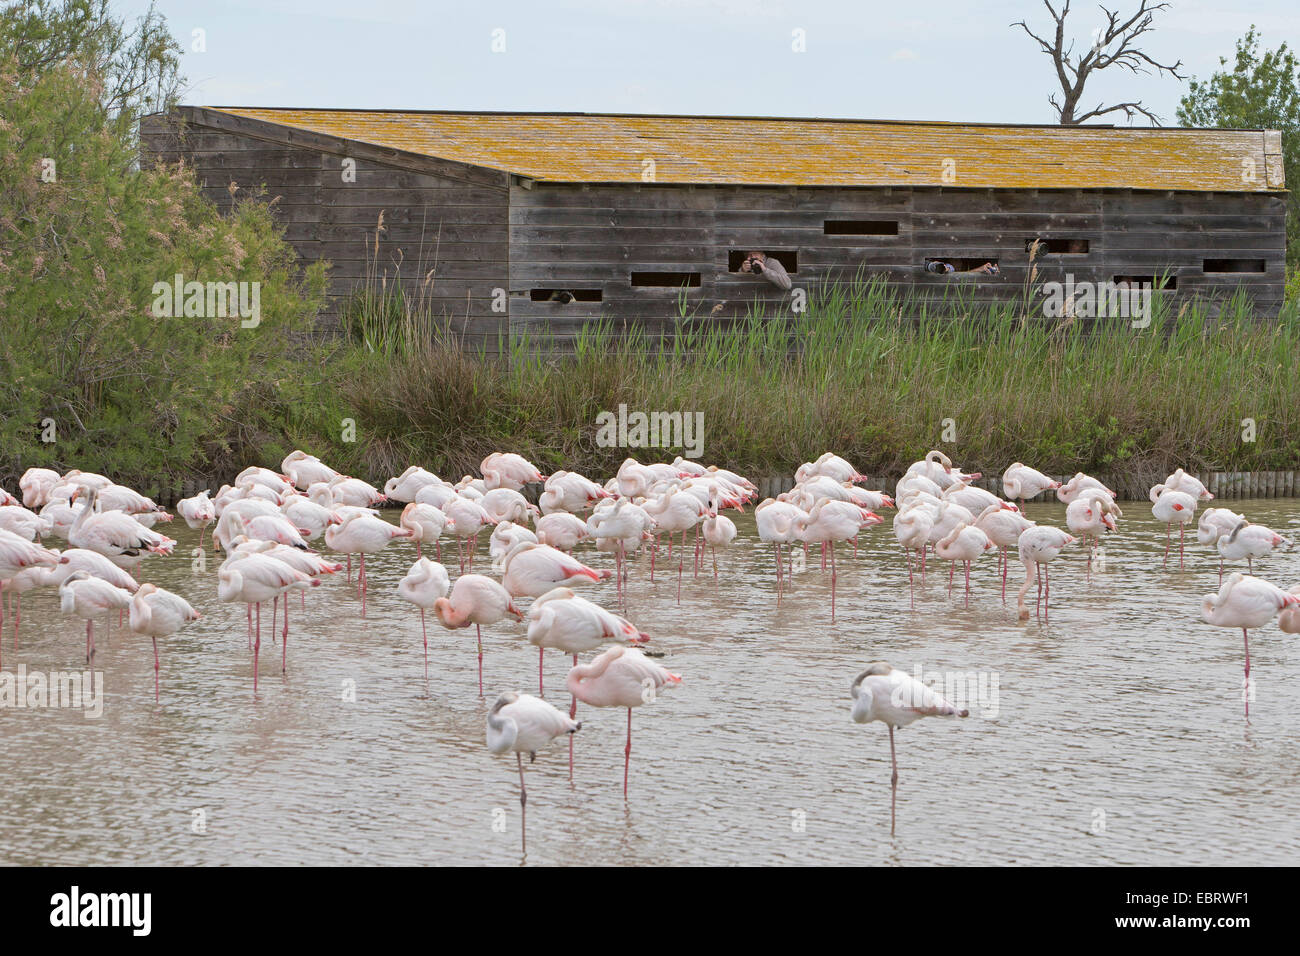 greater flamingo (Phoenicopterus roseus, Phoenicopterus ruber roseus), flamingo flock in shallow water in front of an observation hut, France, Camargue Stock Photo